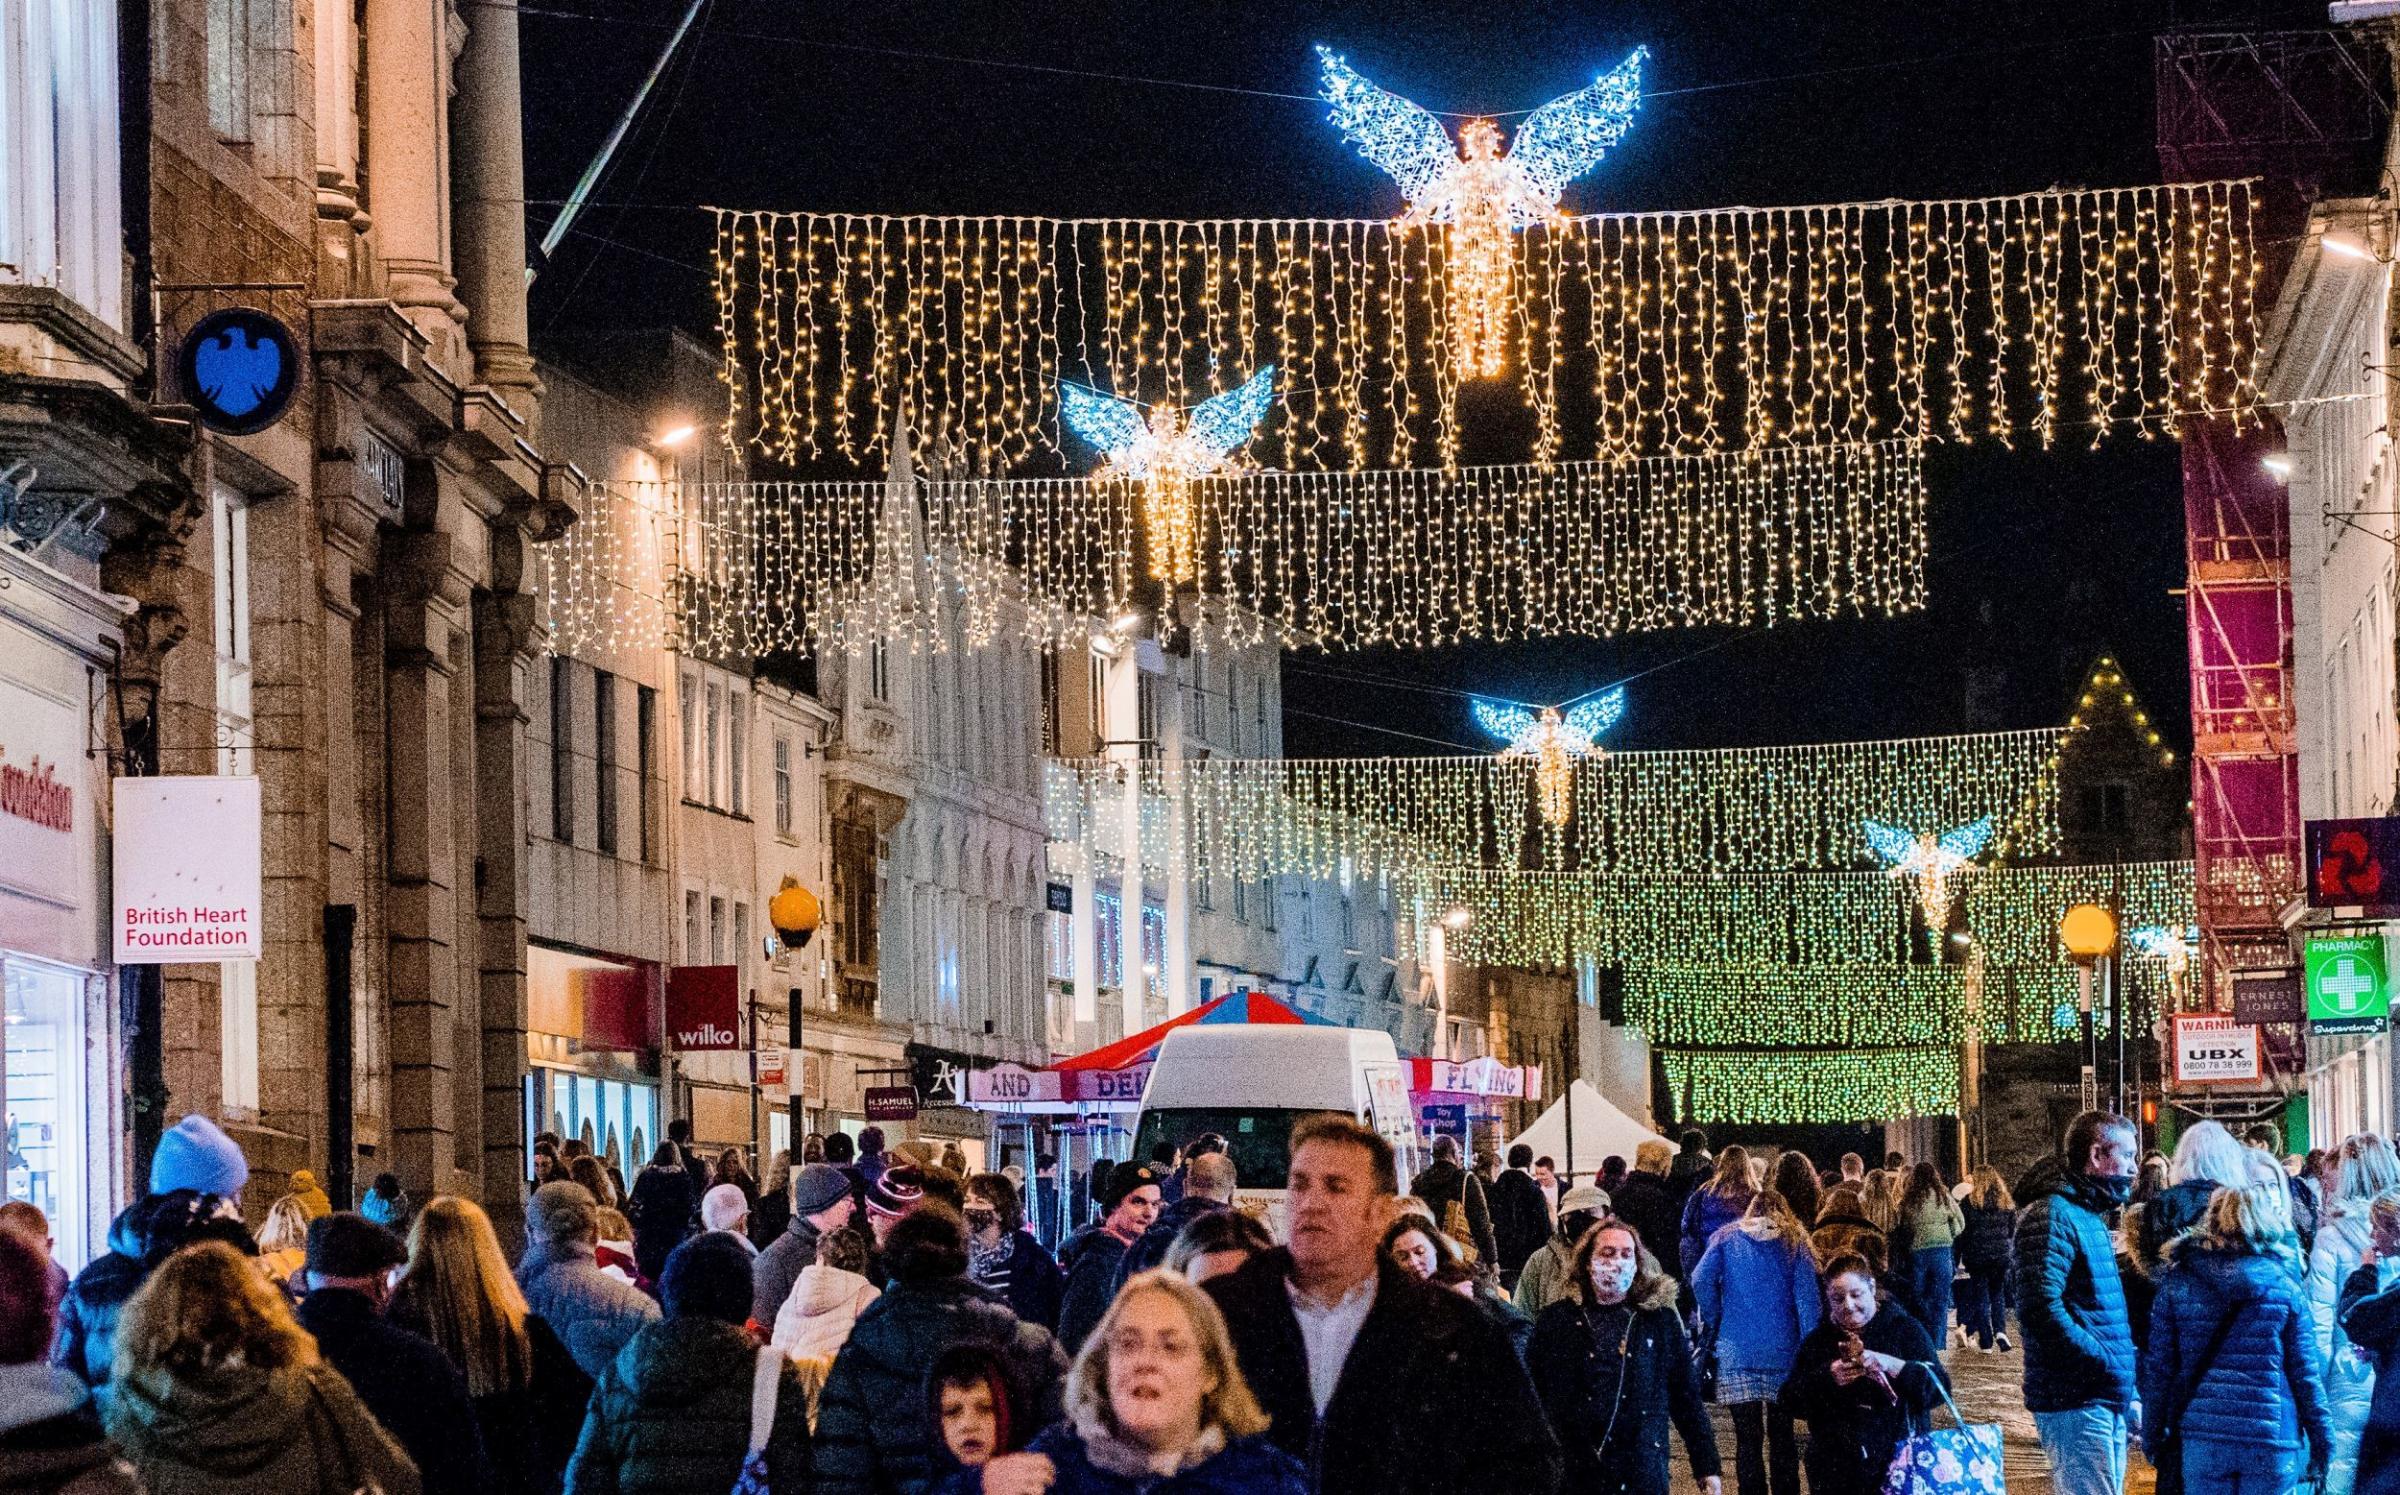 Late night shopping is a popular Christmas event in Truro